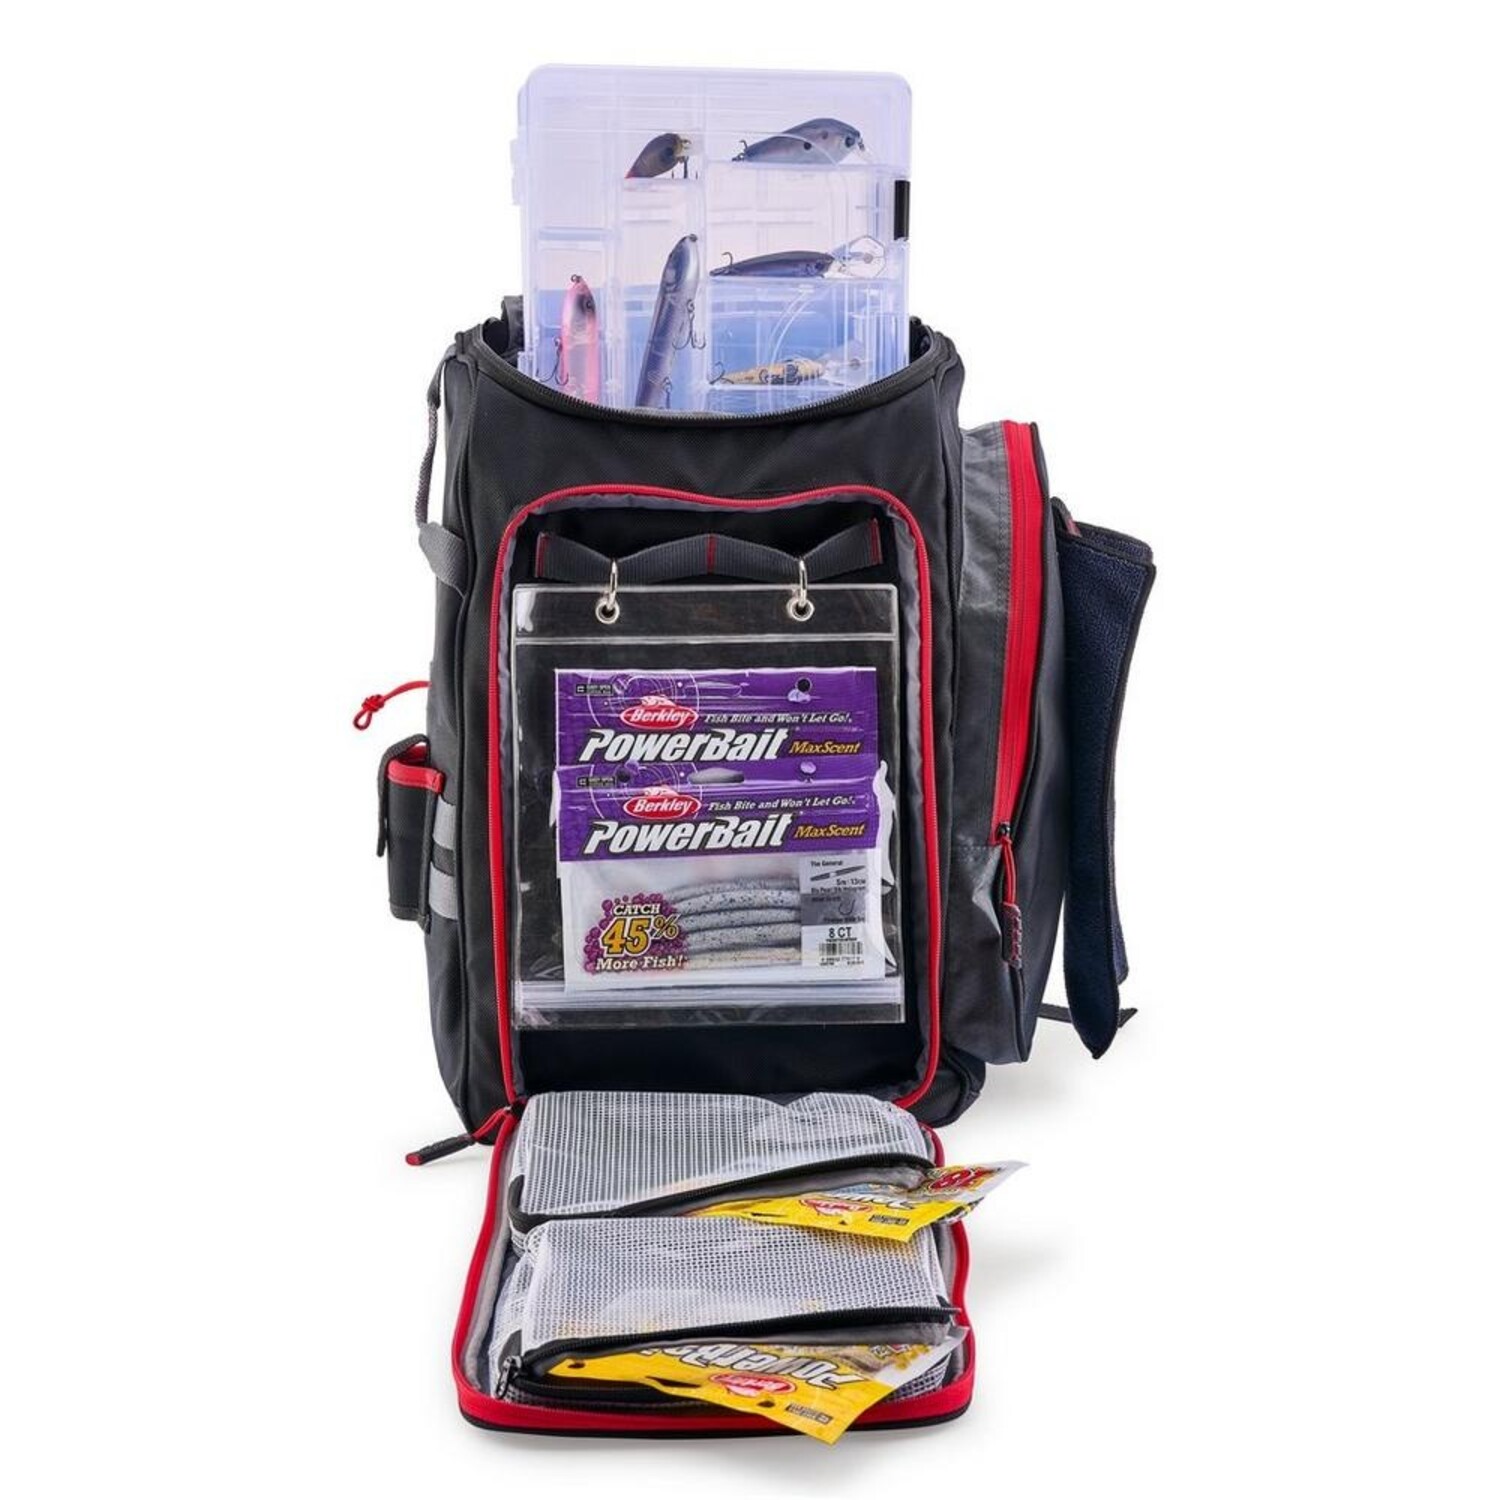 Ugly Stik 3700 Deluxe Backpack - Fin-atics Marine Supply Ltd. Inc.